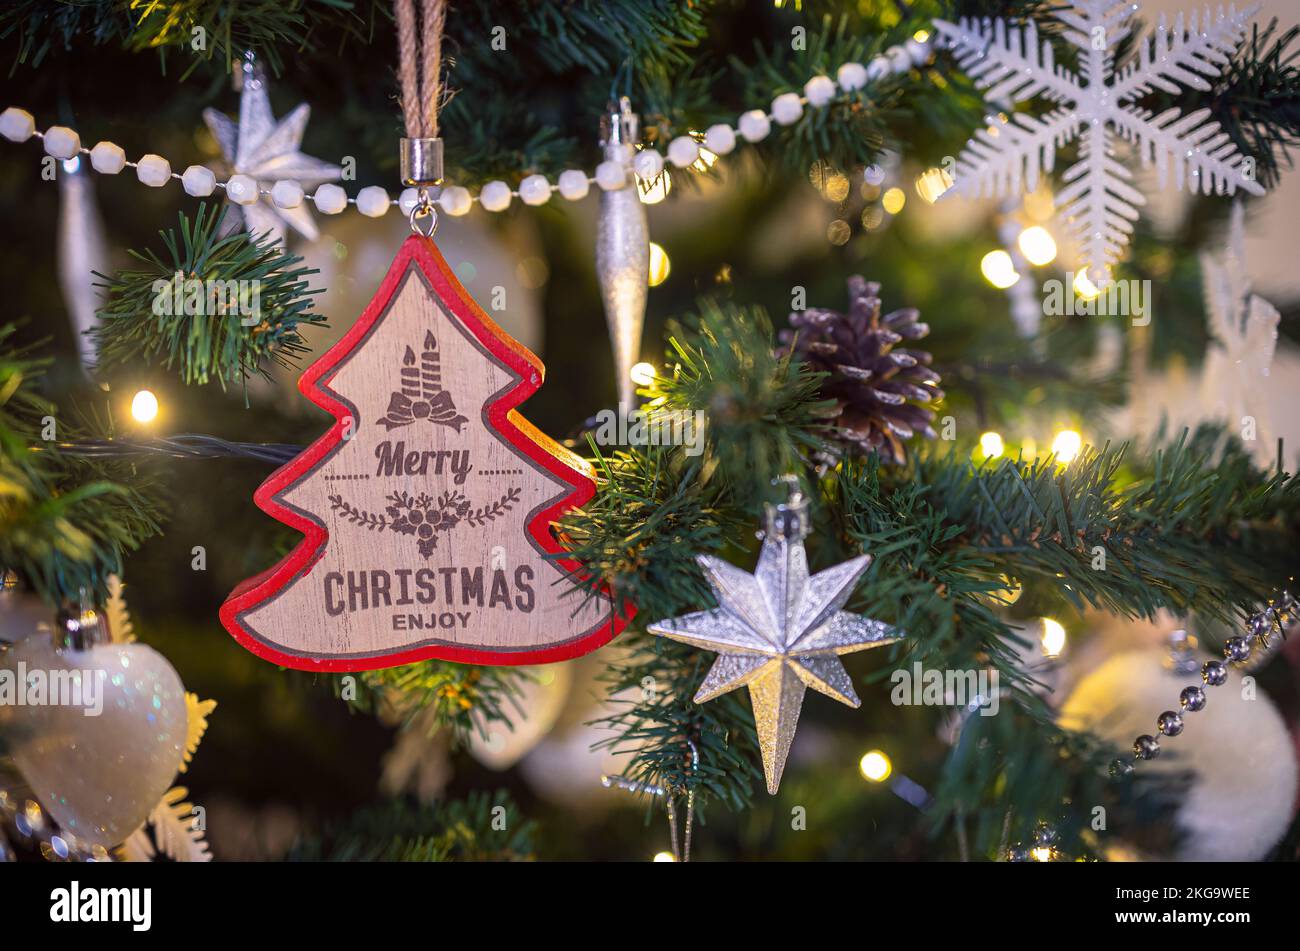 Christmas tree and decorations Stock Photo